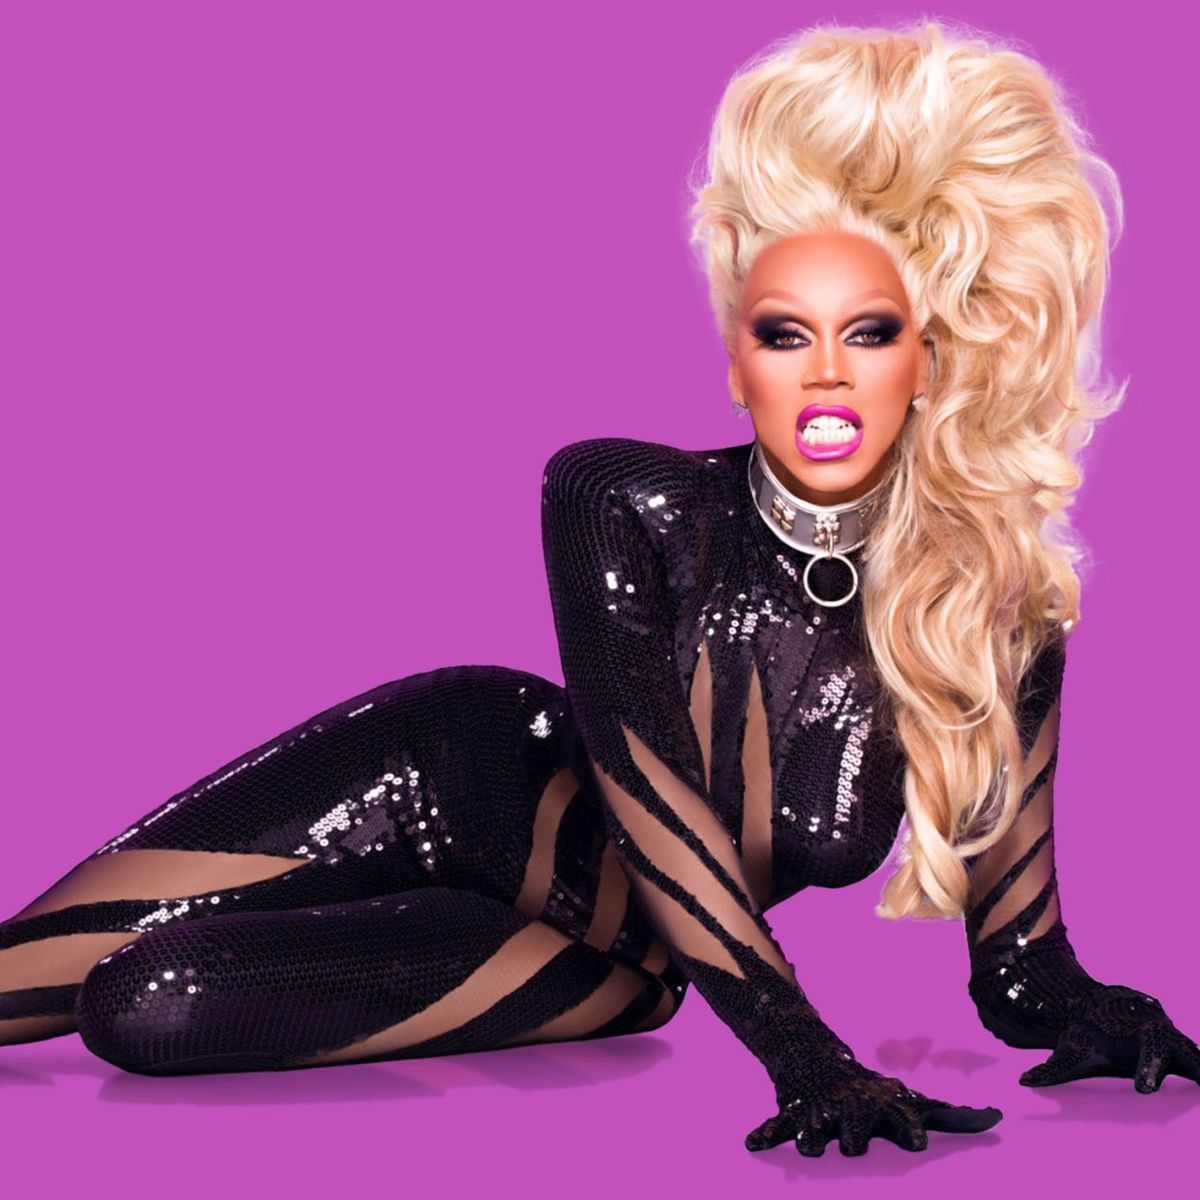 RuPaul Drag Race Sayings and Term Definitions